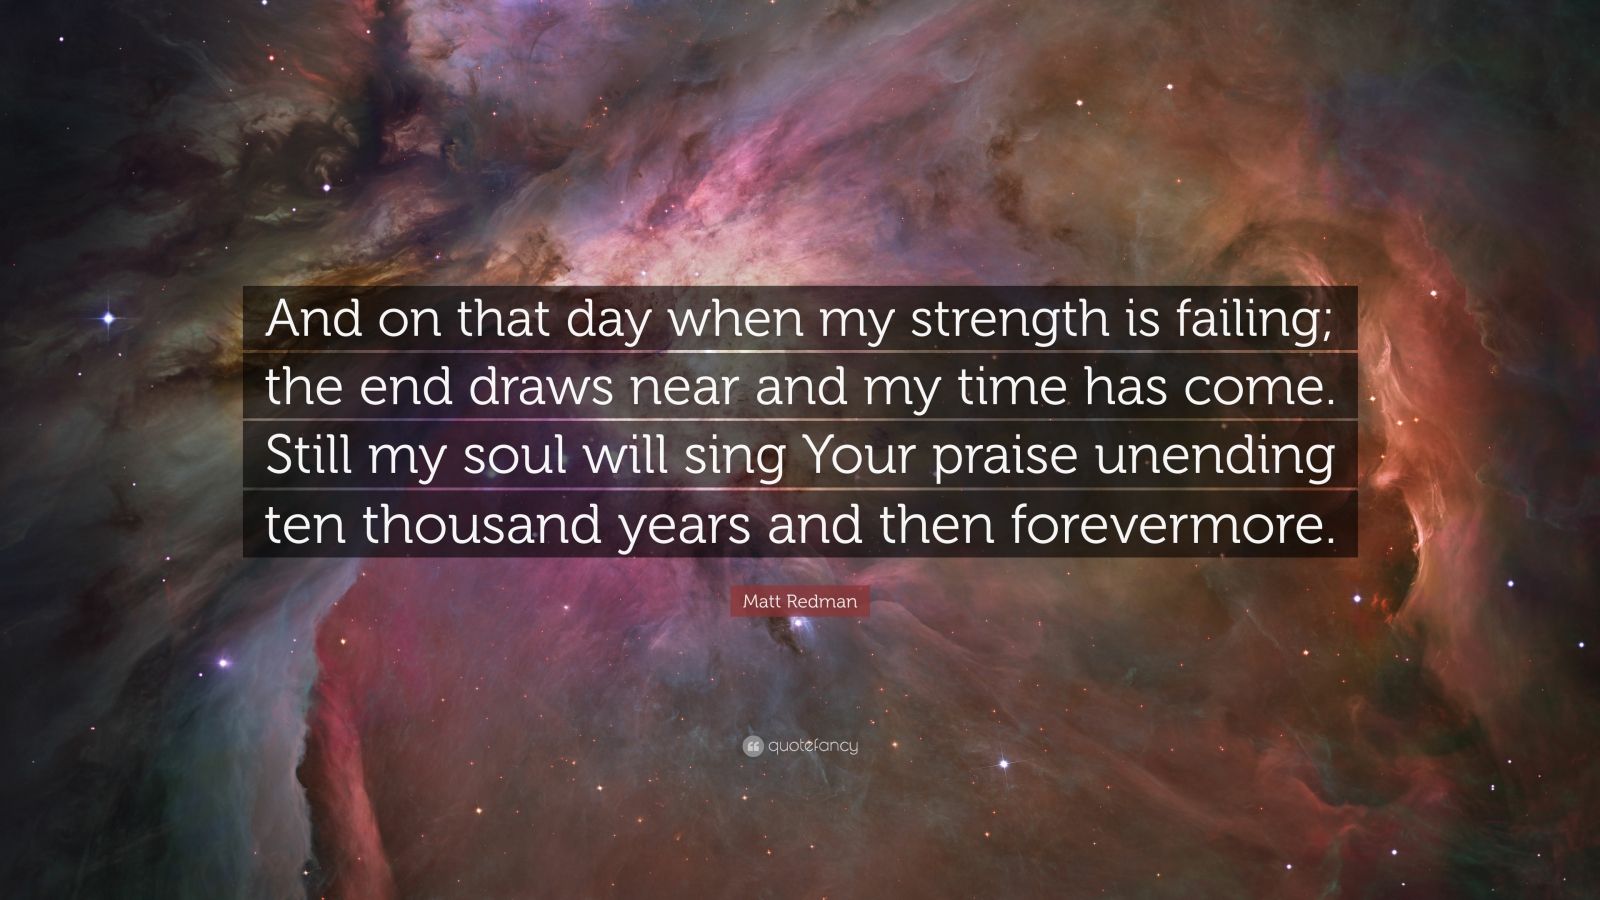 Matt Redman Quote: “And on that day when my strength is failing; the